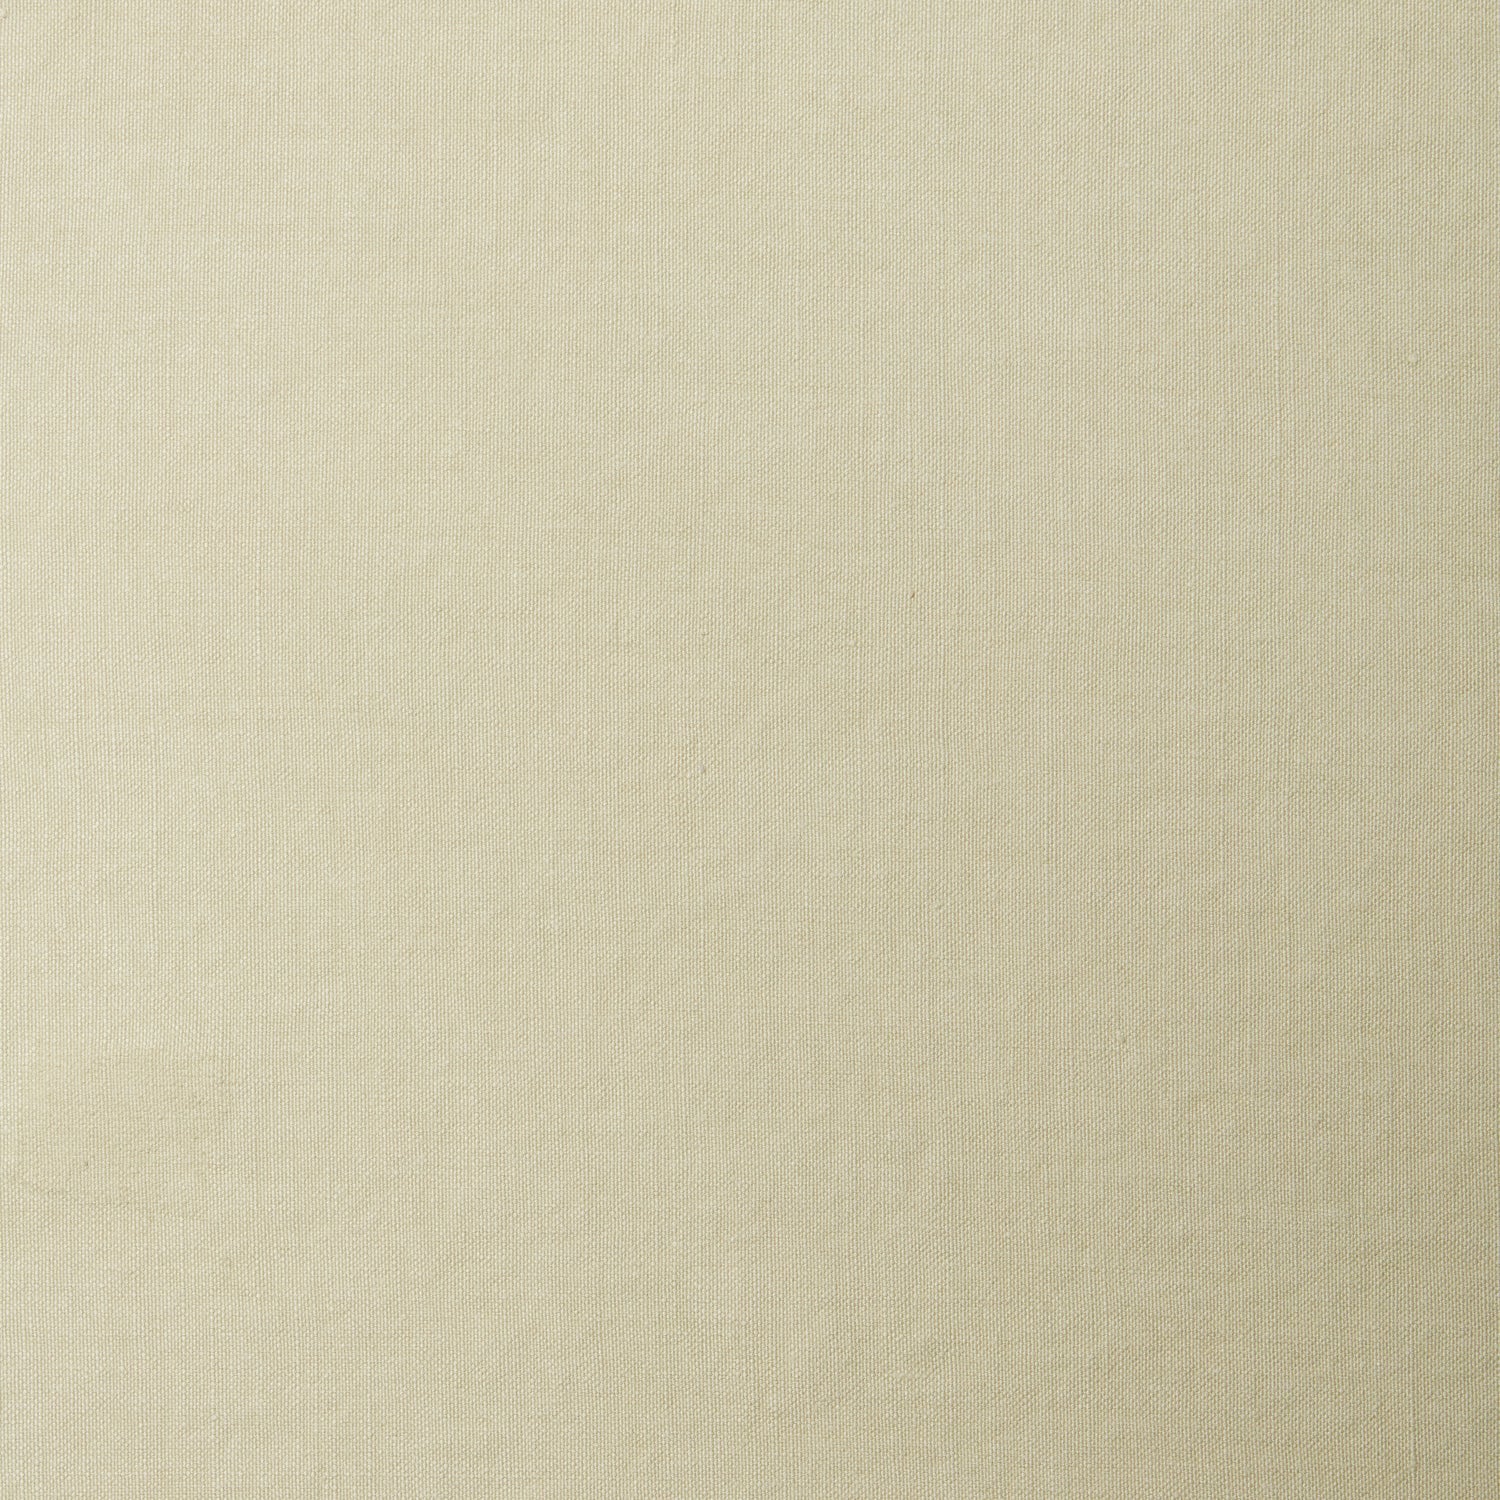 A swatch of linen fabric in a solid pale green color.